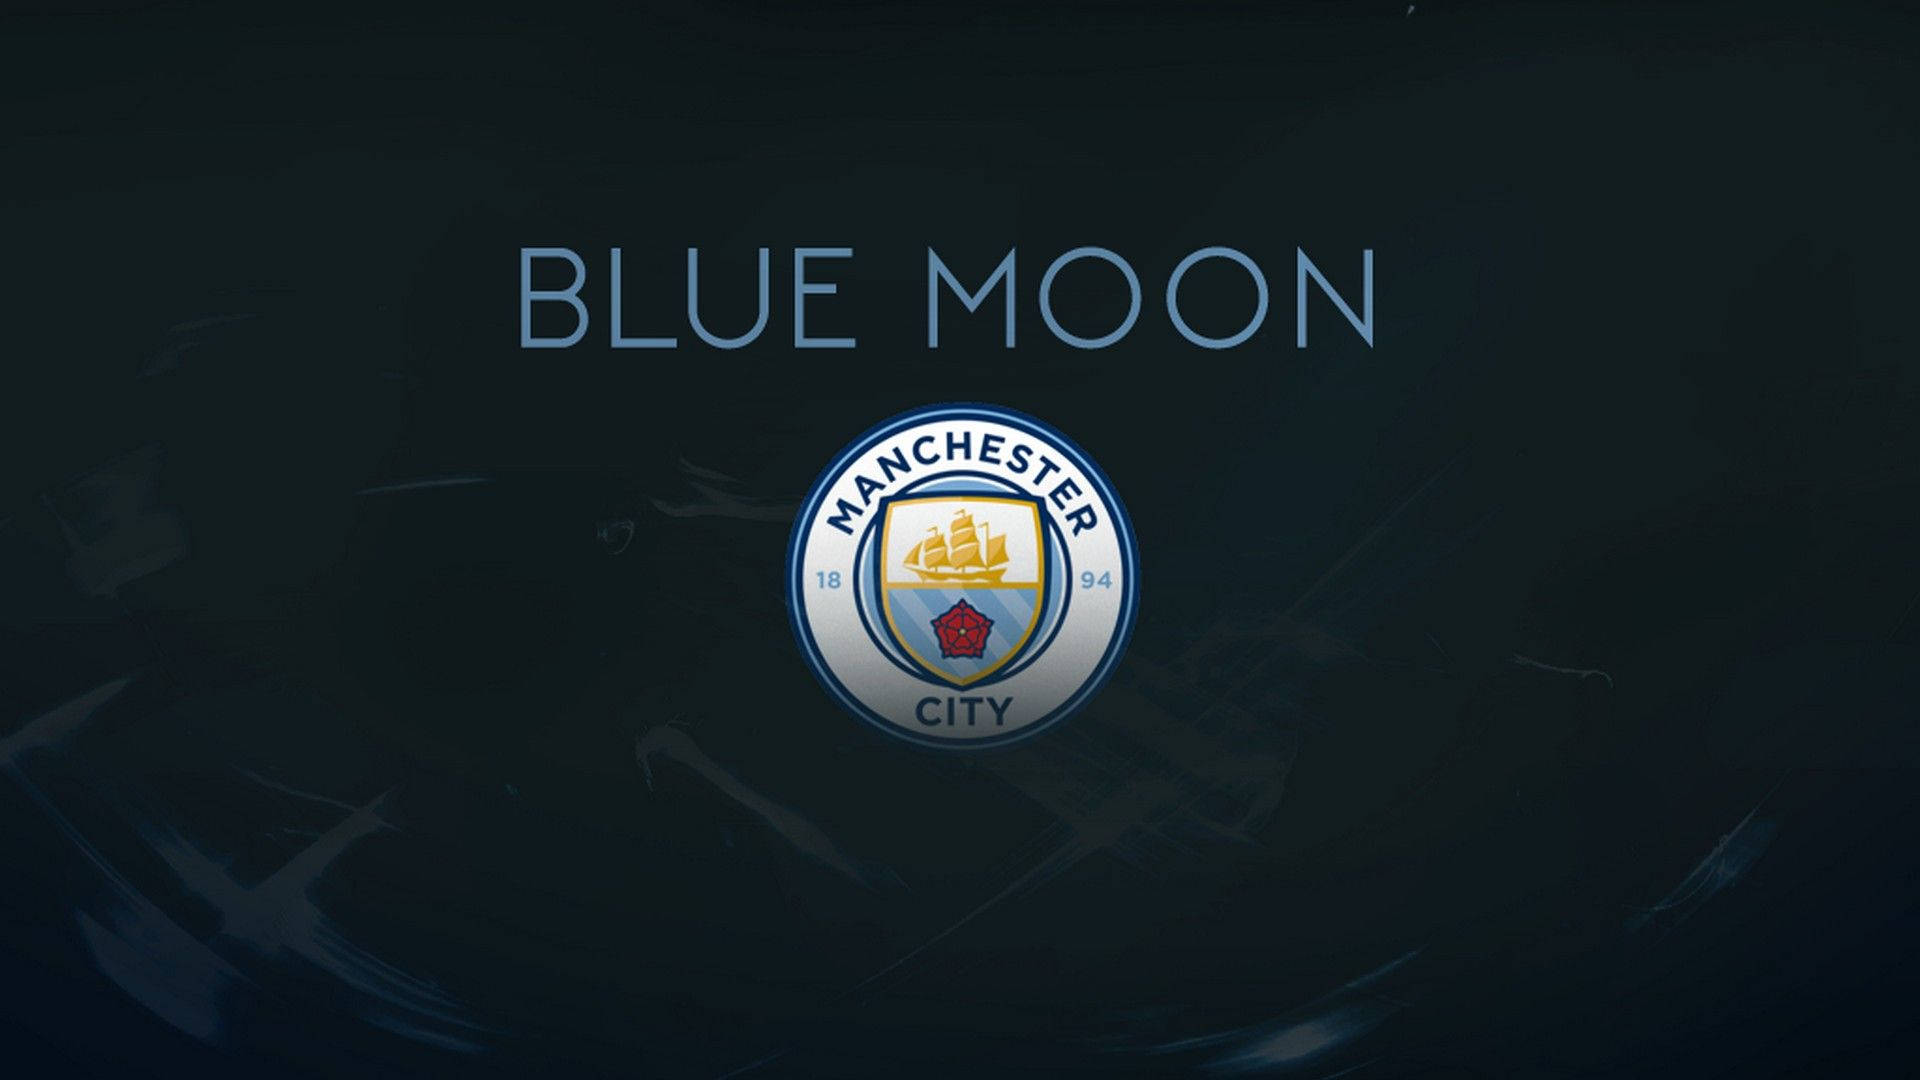 The Official Logo of Manchester City Football Club Wallpaper